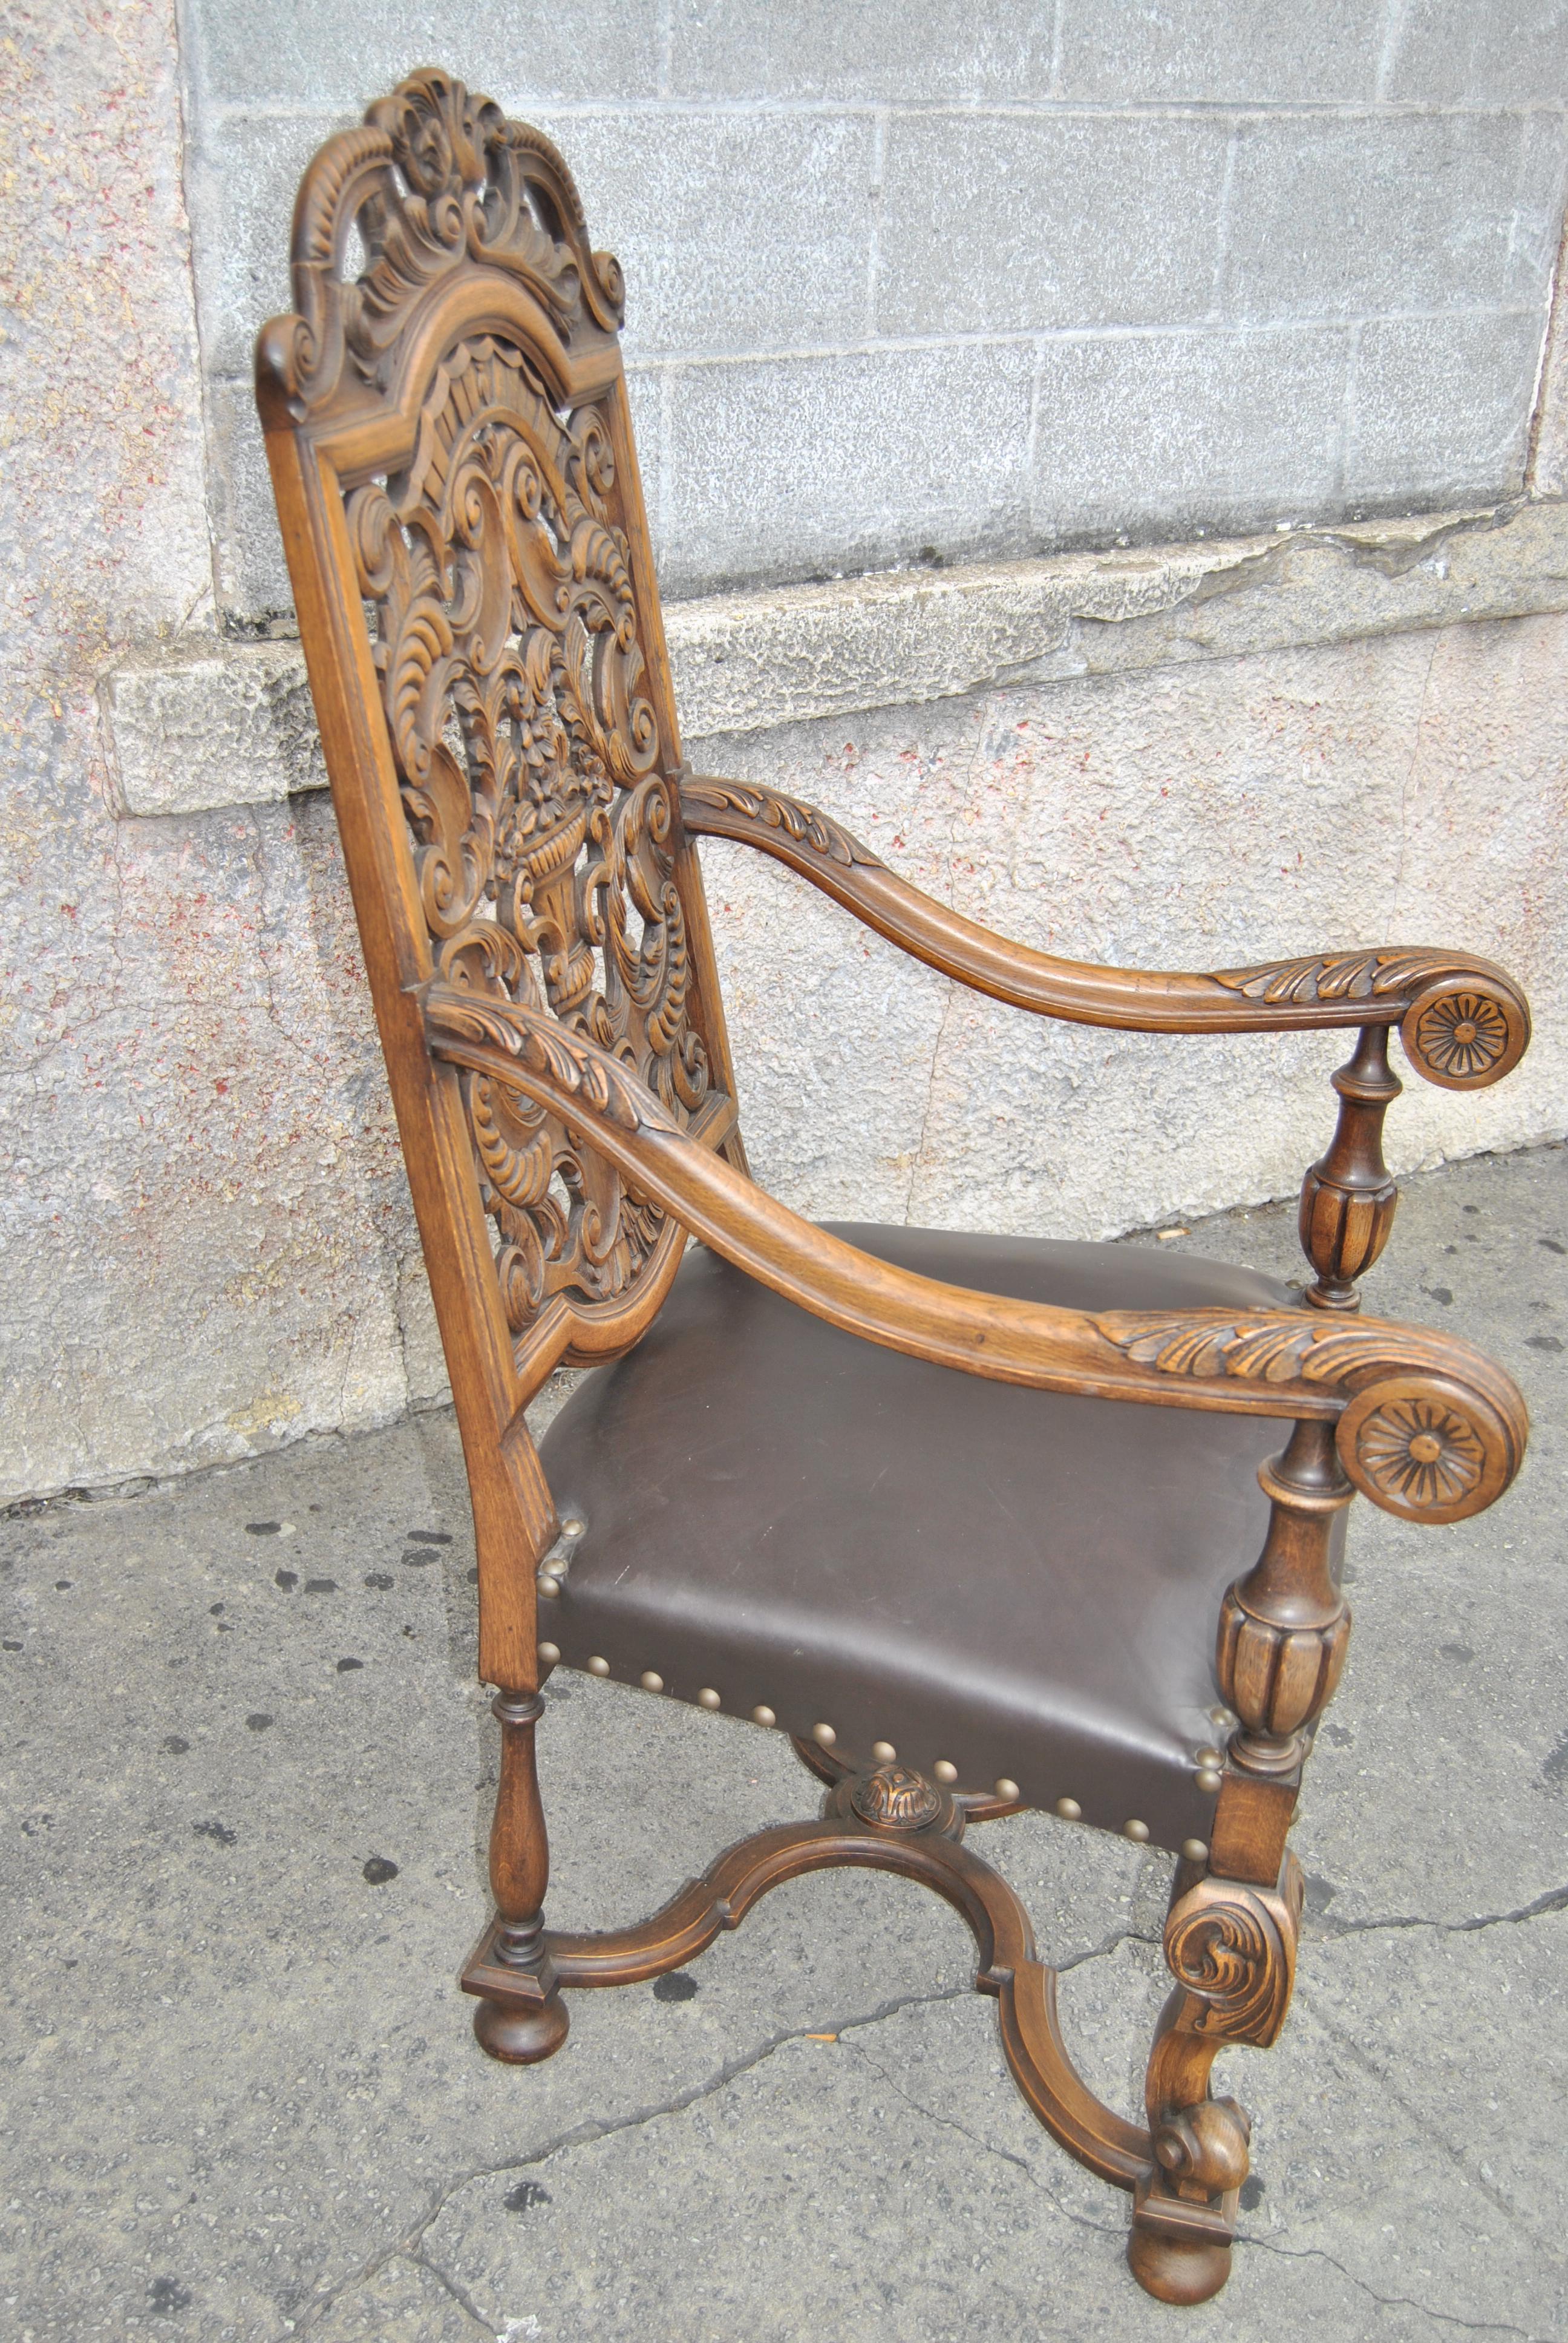 This is a carved solid oak armchair in the Elizabethan atyle. The chair was made in England, circa 1900. All of the carving is hand done and of superior quality and depth. The chair has a fabulously shaped back that is heavily carved. The arms are